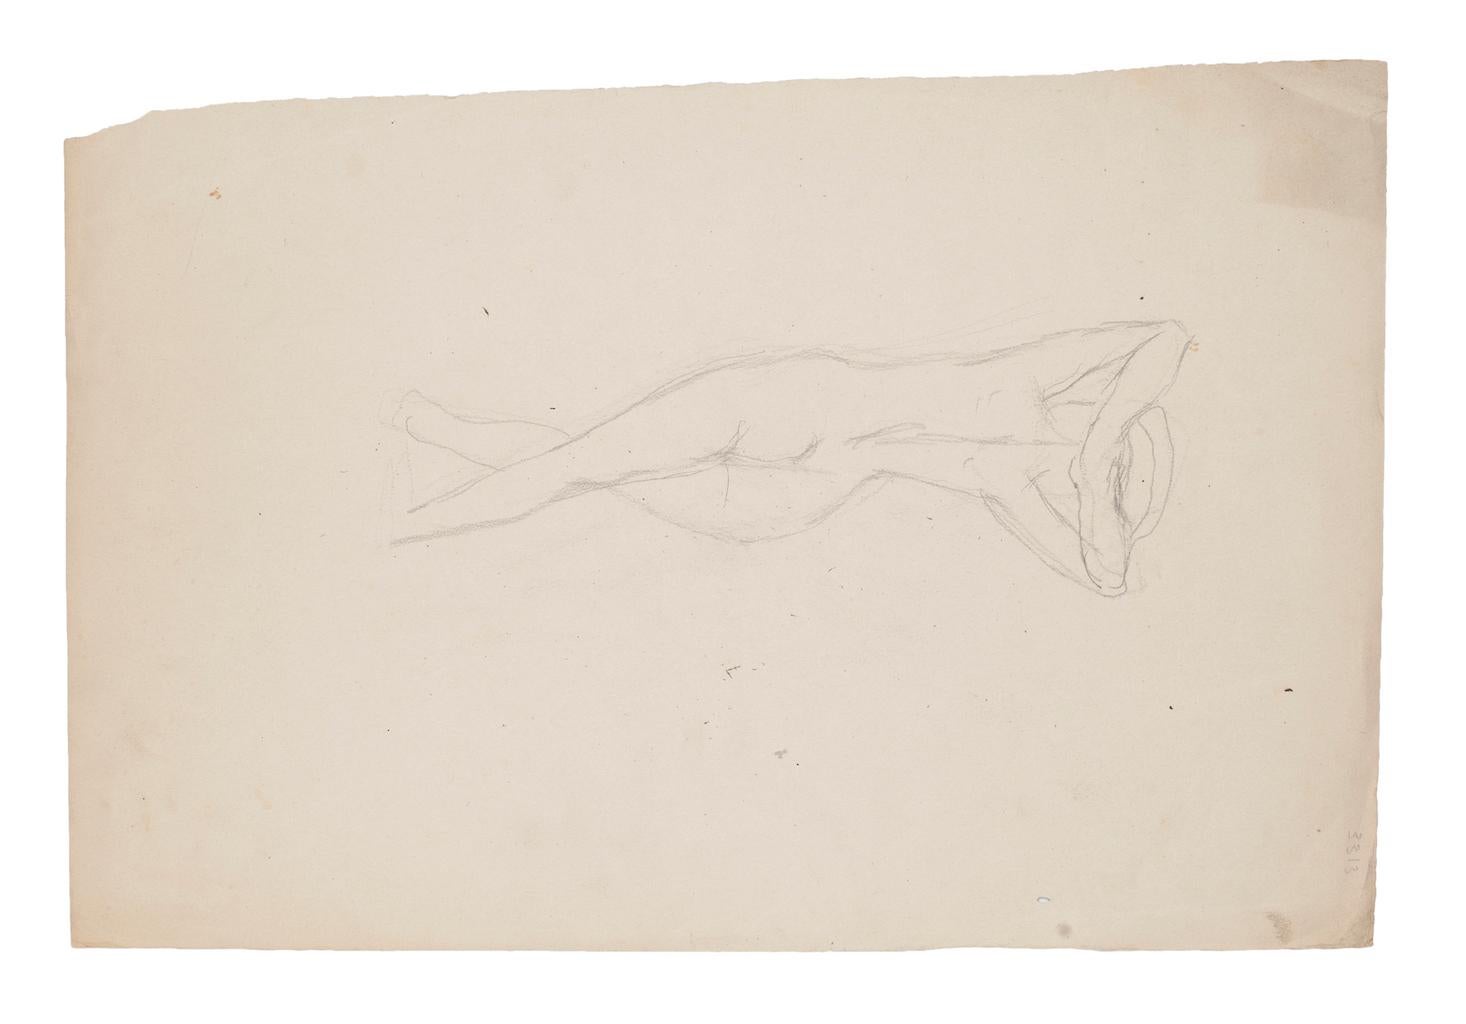 Nude Woman is an original drawing in pencil on paper, realized by an Anonymous french artist of the XX century.

The state of preservation: the are cutaways on the margin and some folding and diffused foxings.

Sheet dimension: 32 x 50

The artwork